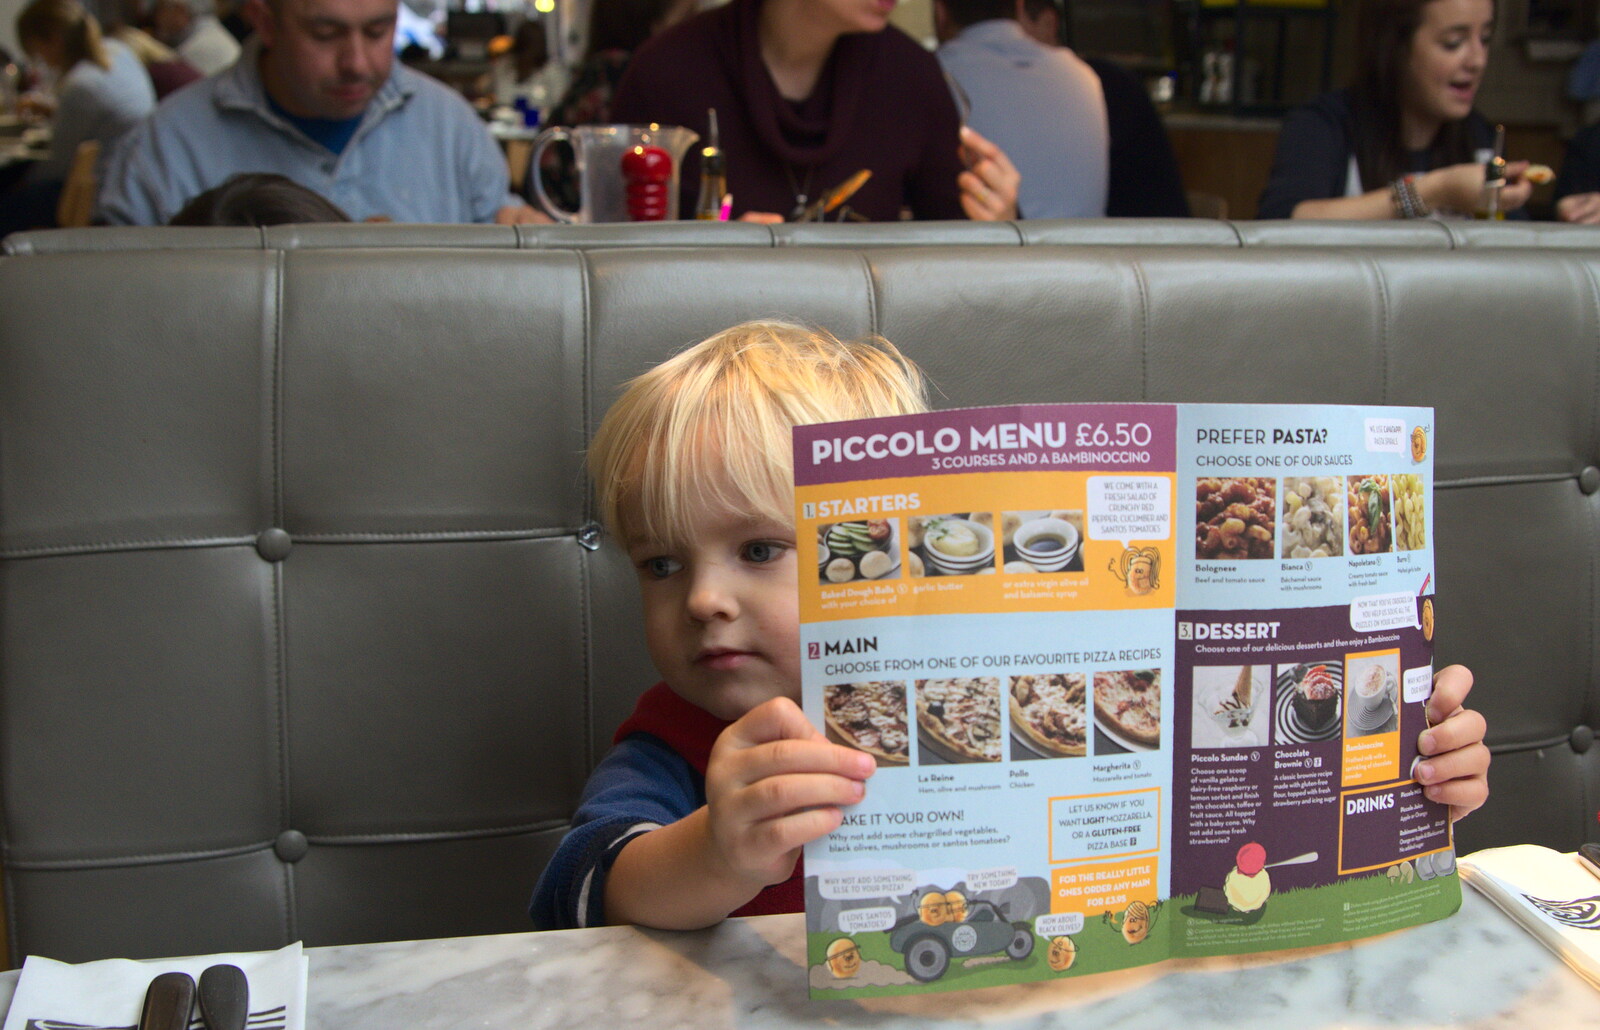 Harry checks out the menu in Pizza Express from A Trip to Abbey Gardens, Bury St. Edmunds, Suffolk - 29th October 2014